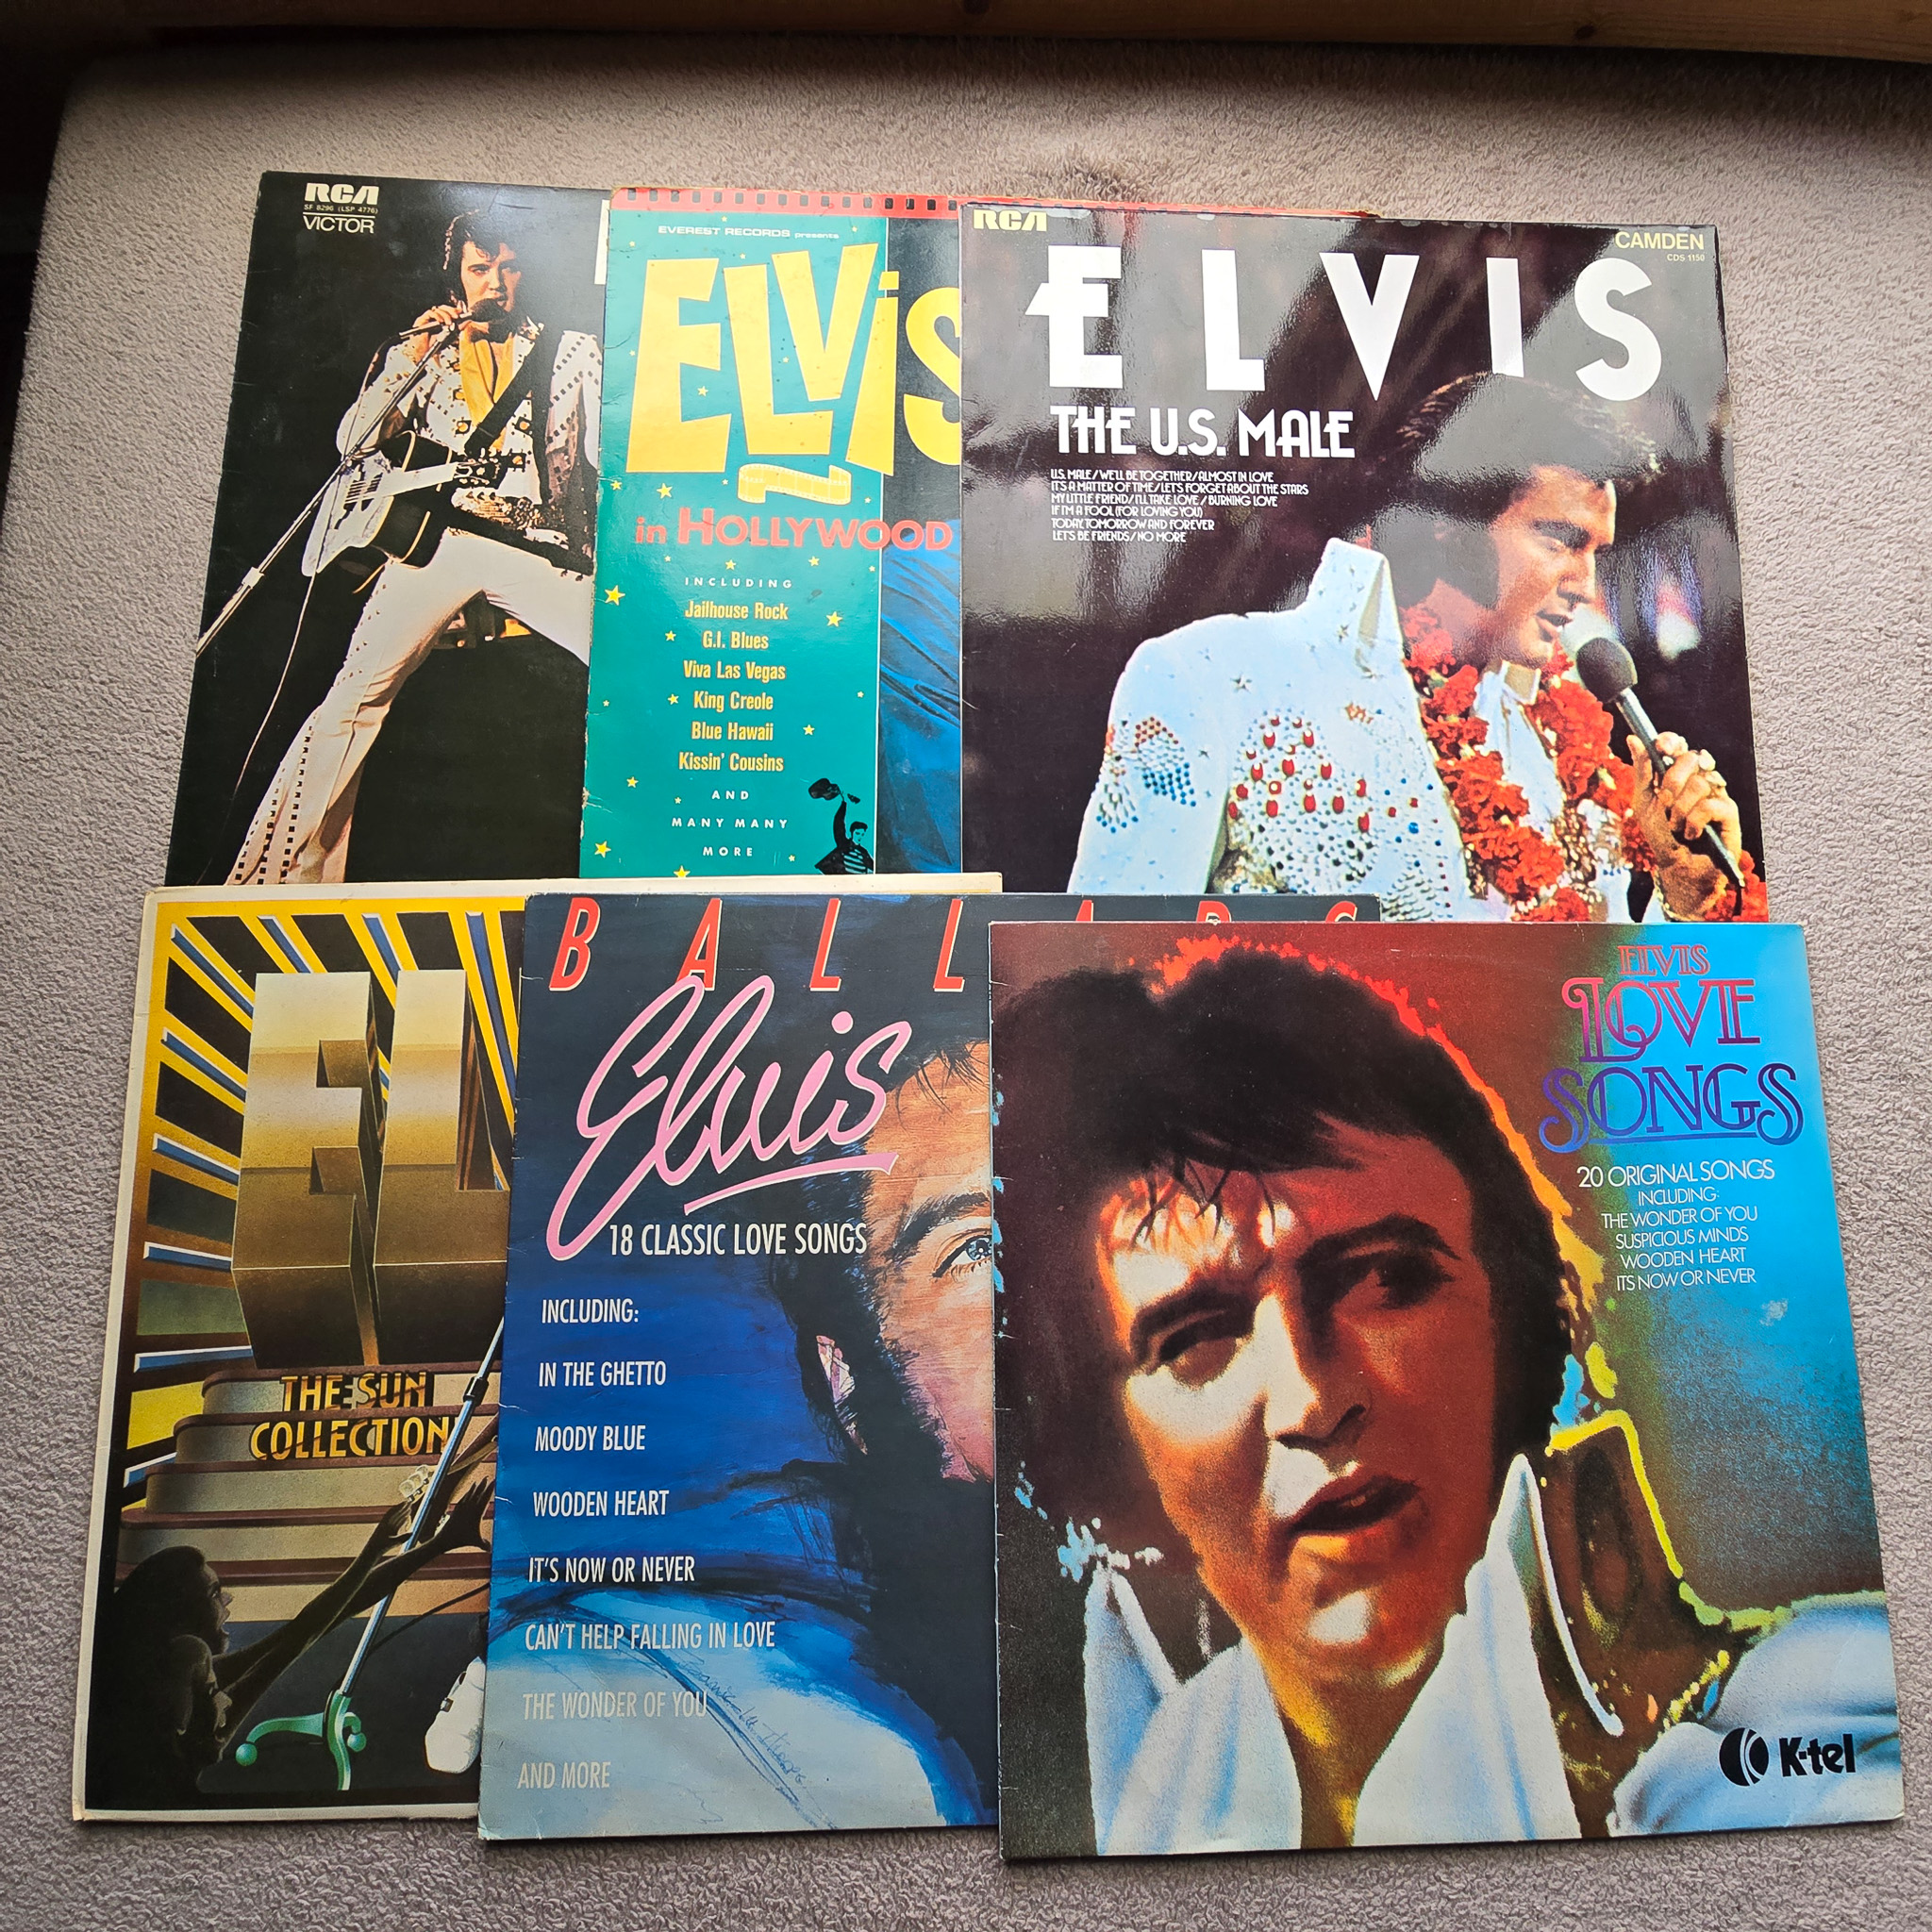 Collection of 50's and 60's Vinyl LP's including Elvis Presley etc - Image 2 of 5